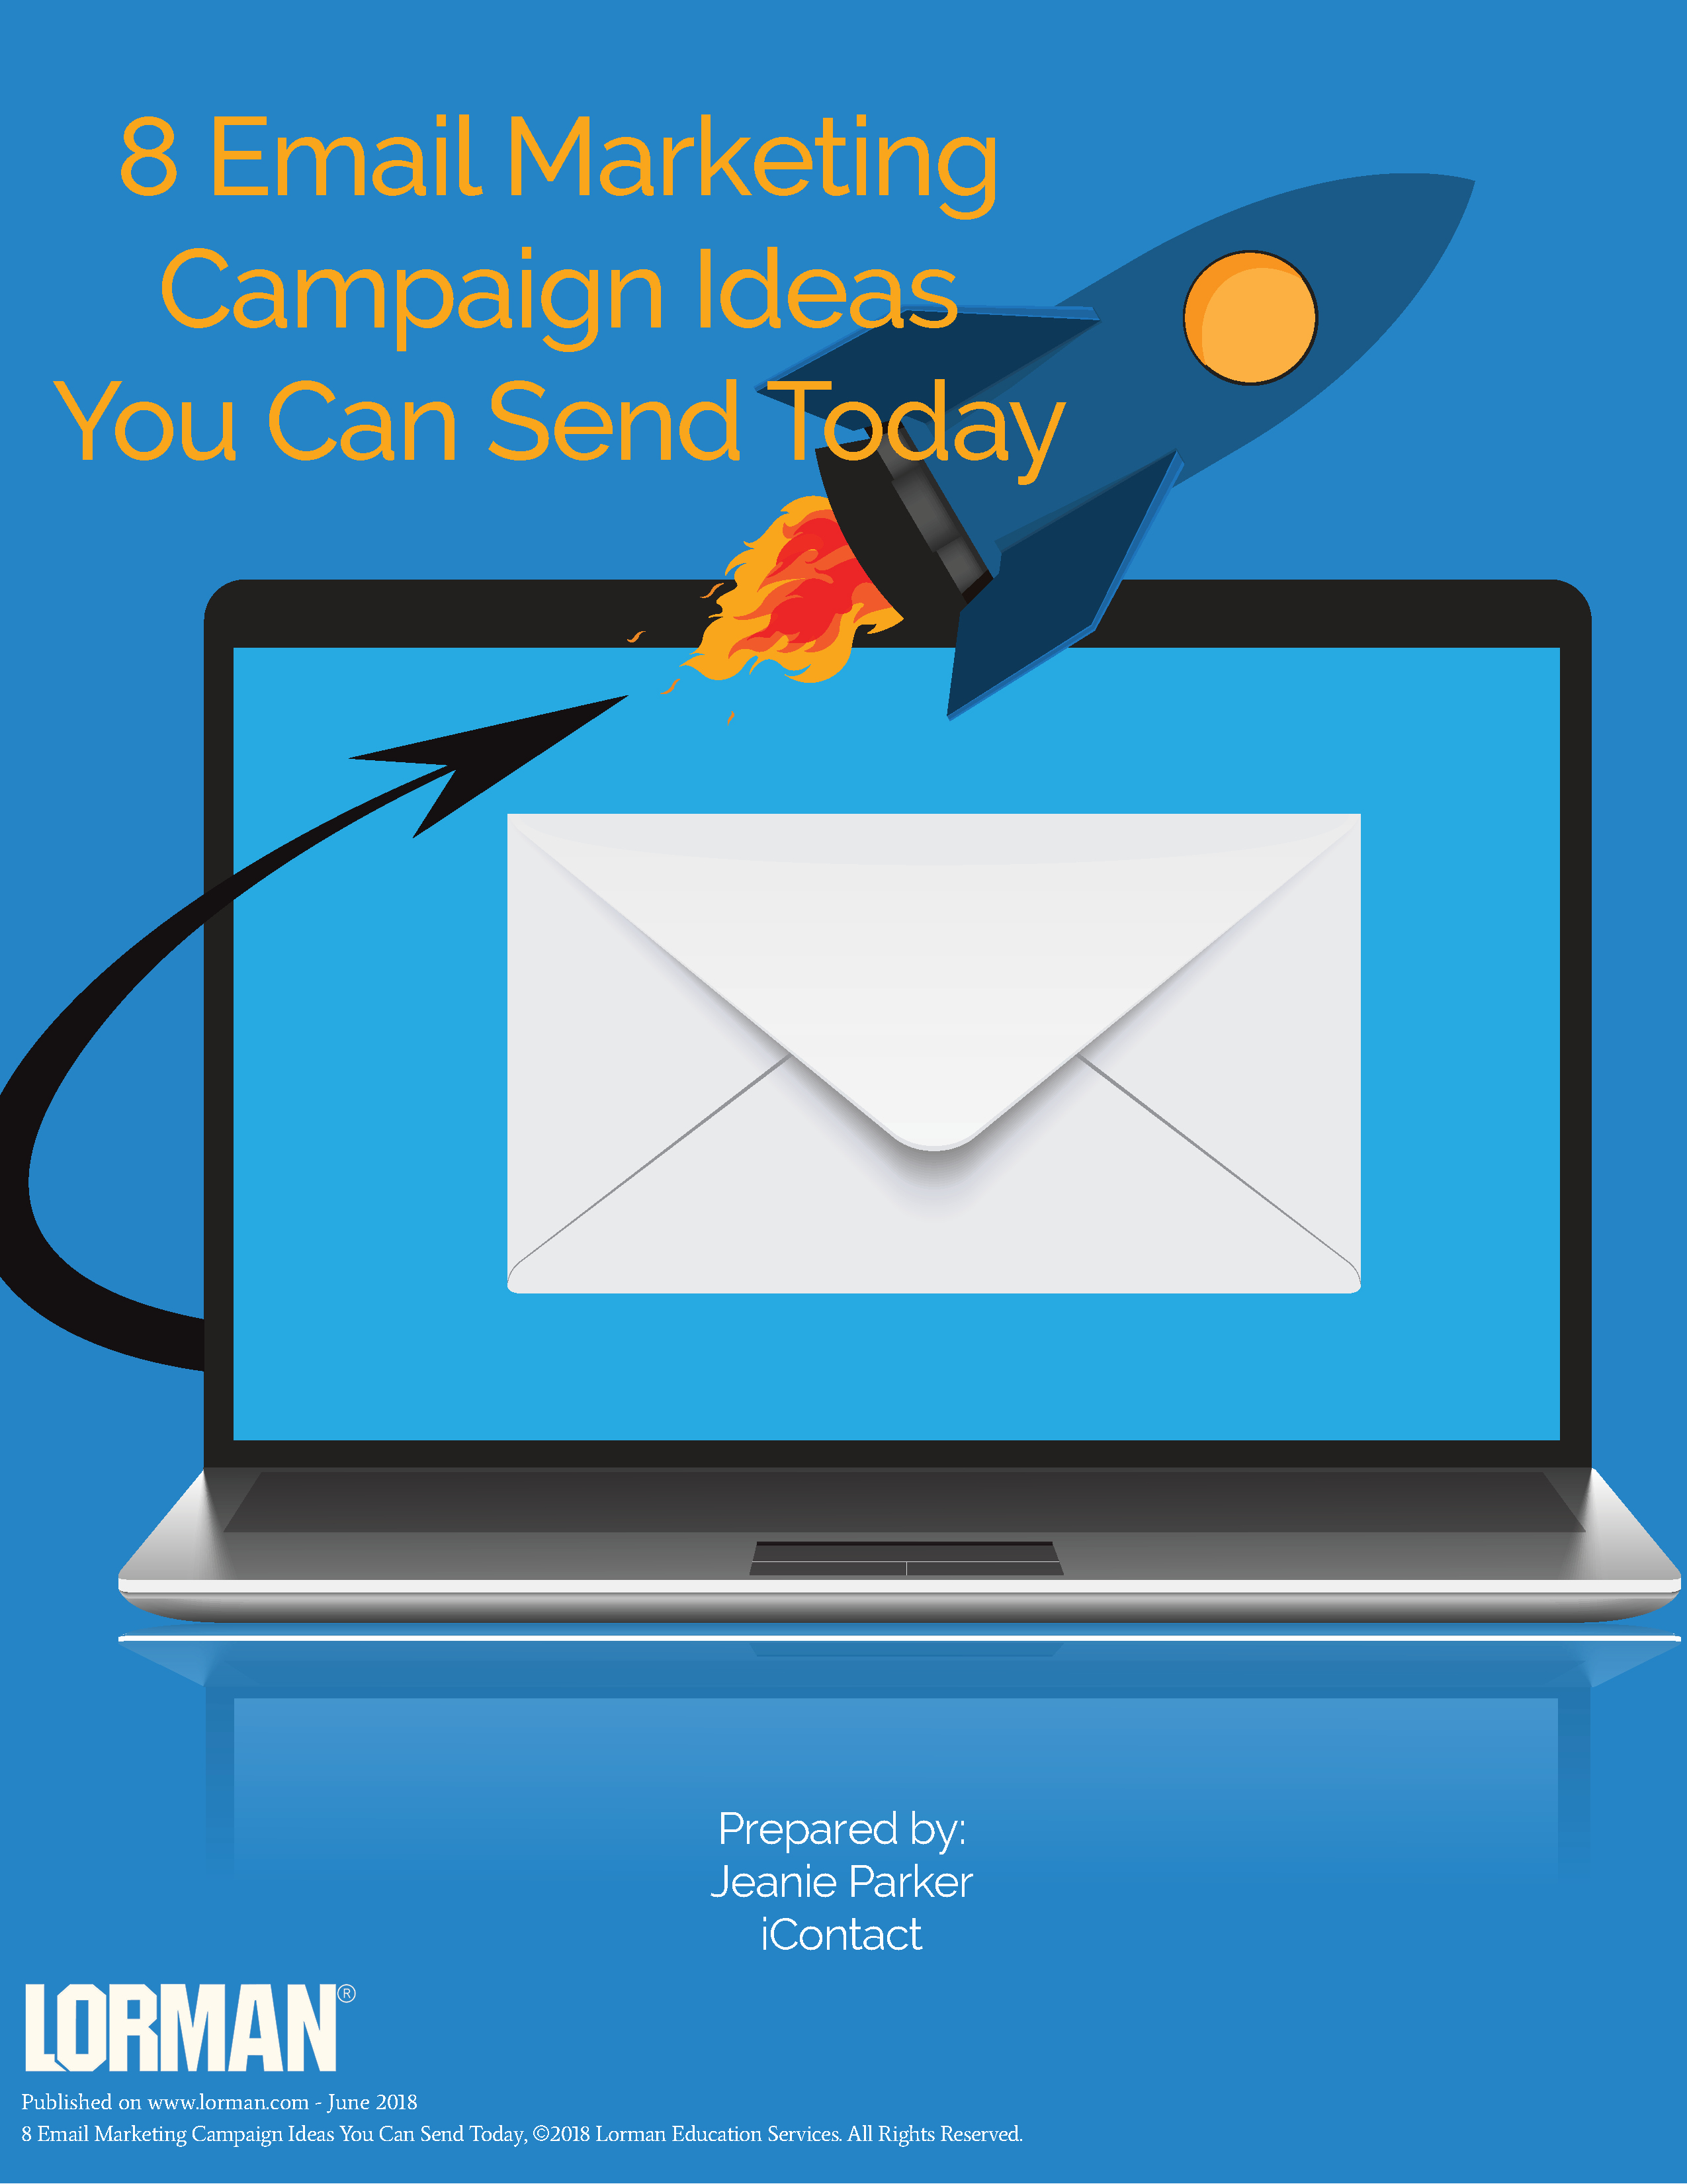 8 Email Marketing Campaign Ideas You Can Send Today